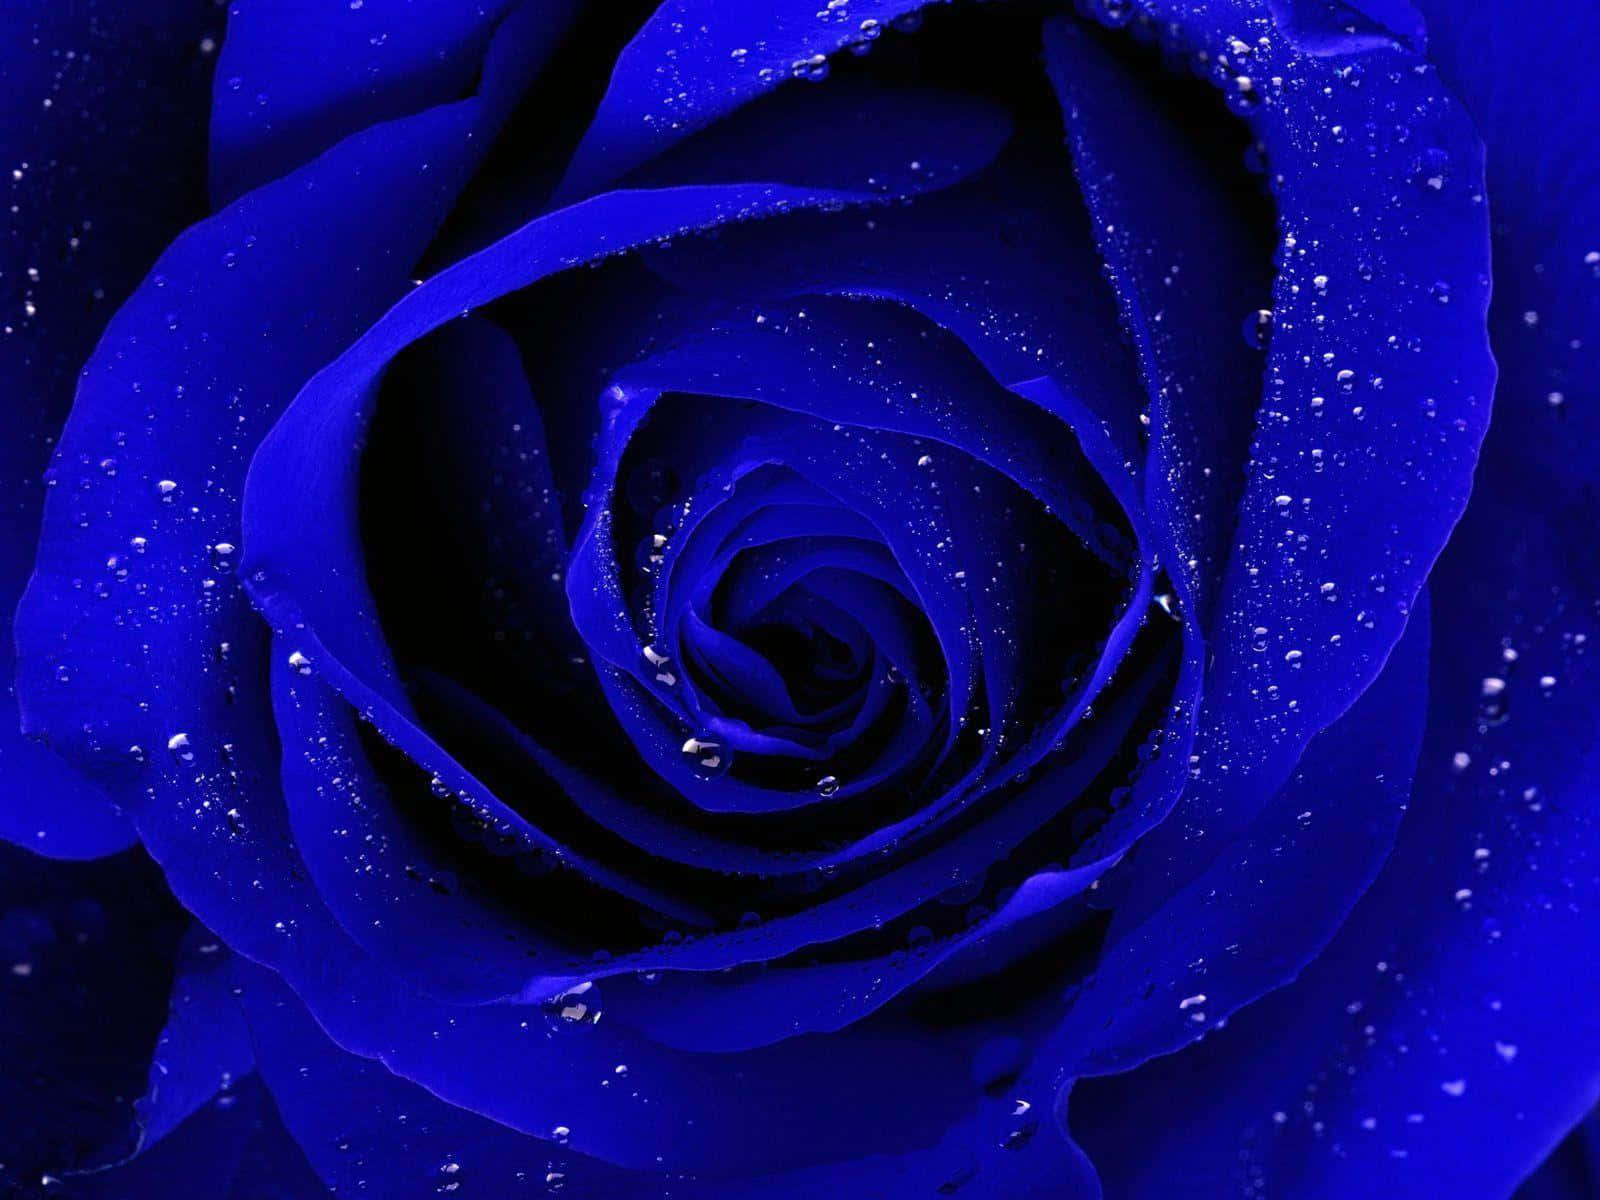 A Blue Rose With Water Drops On It Background